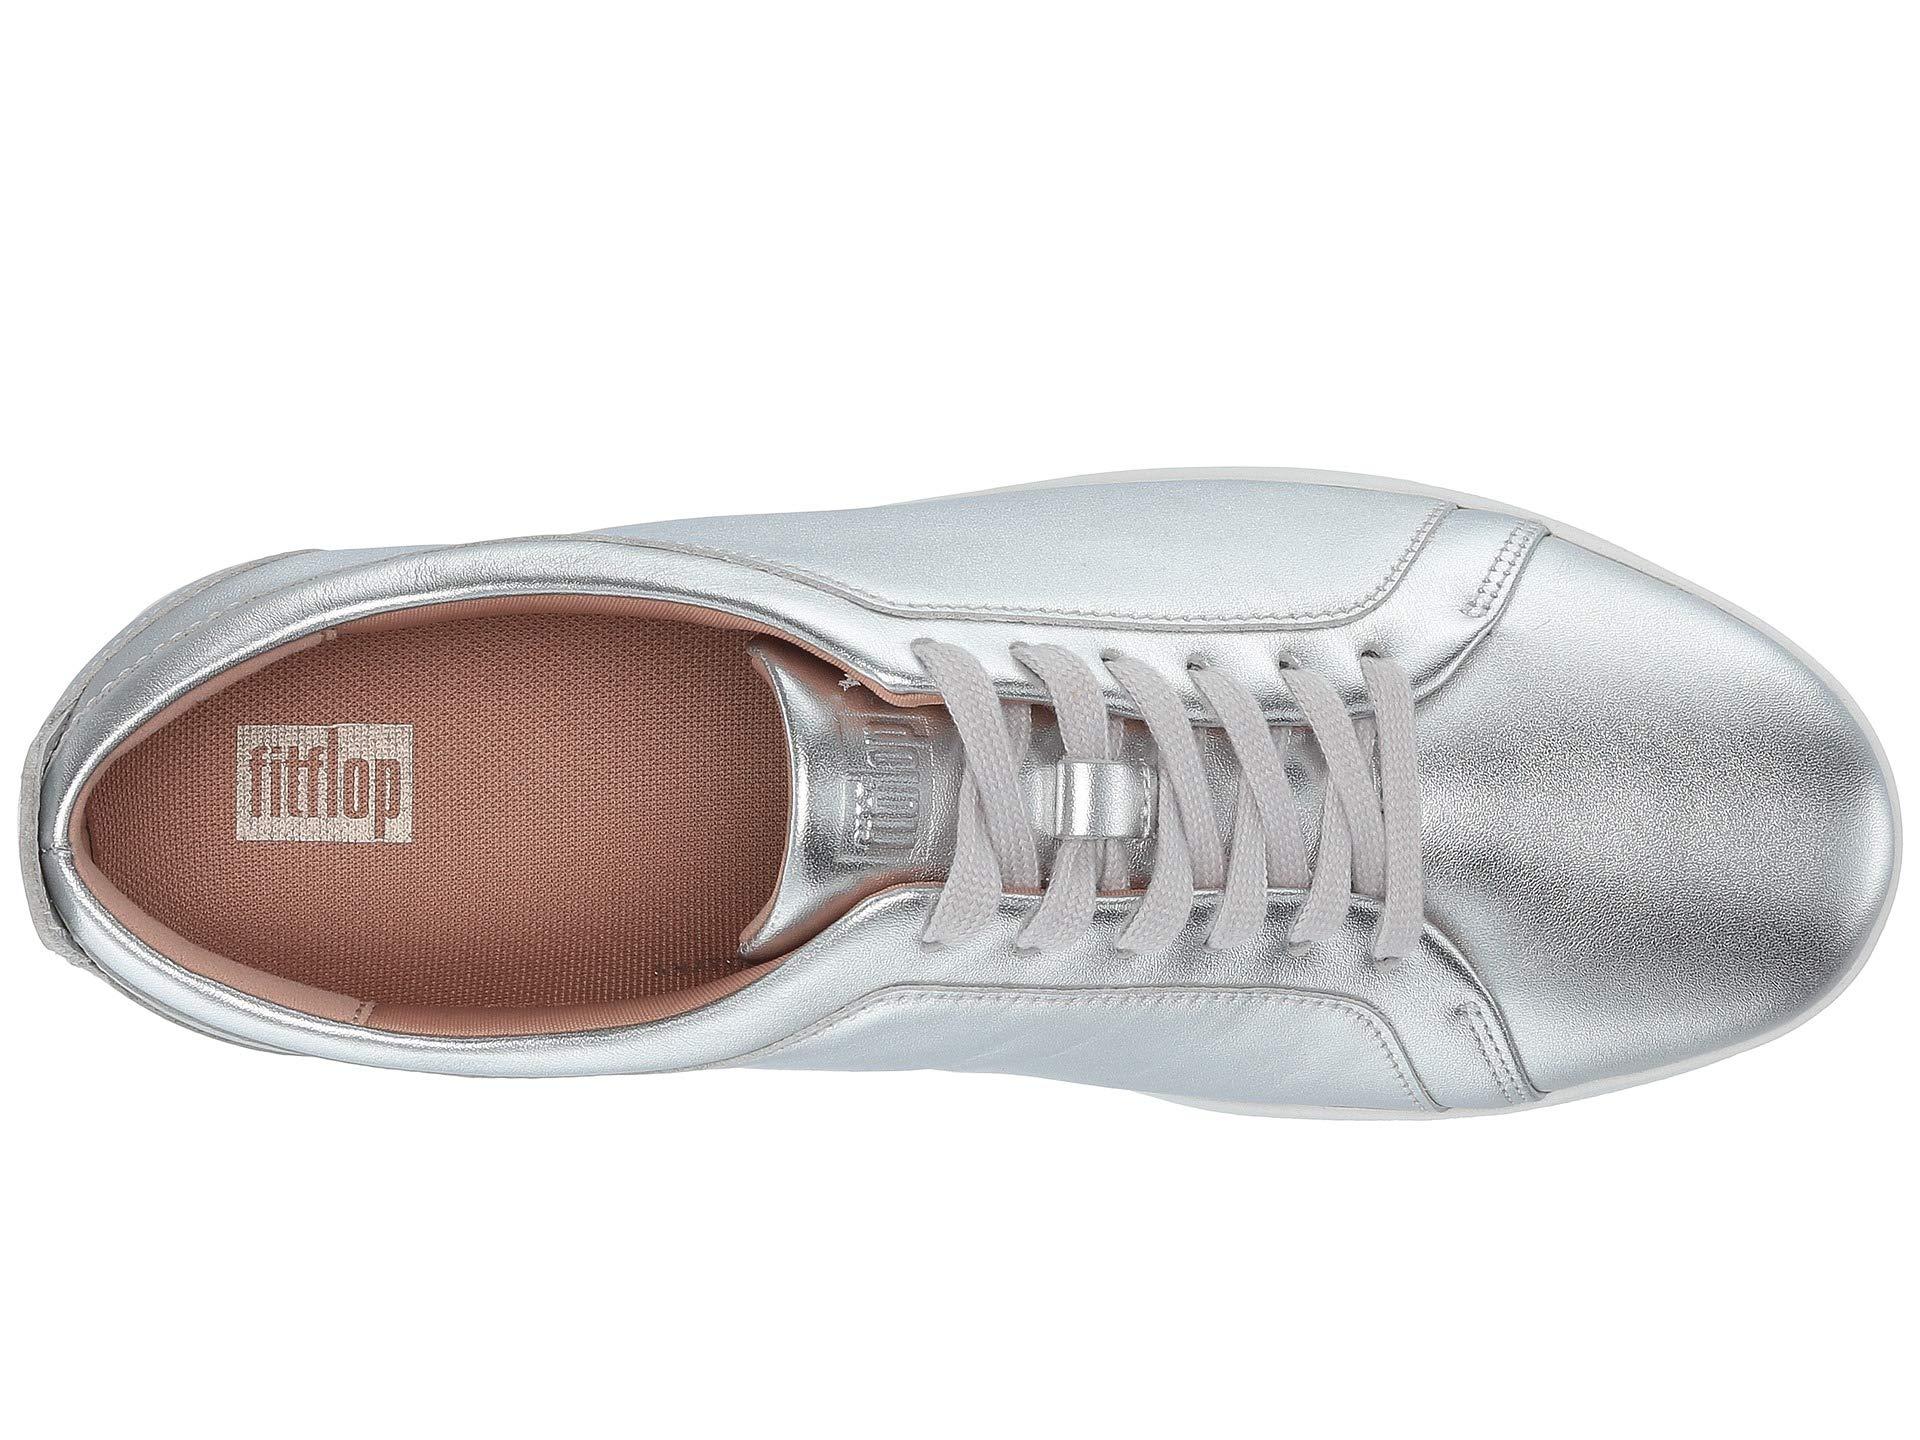 Fitflop Leather Rally Slip On Trainers in Silver (Metallic) - Lyst